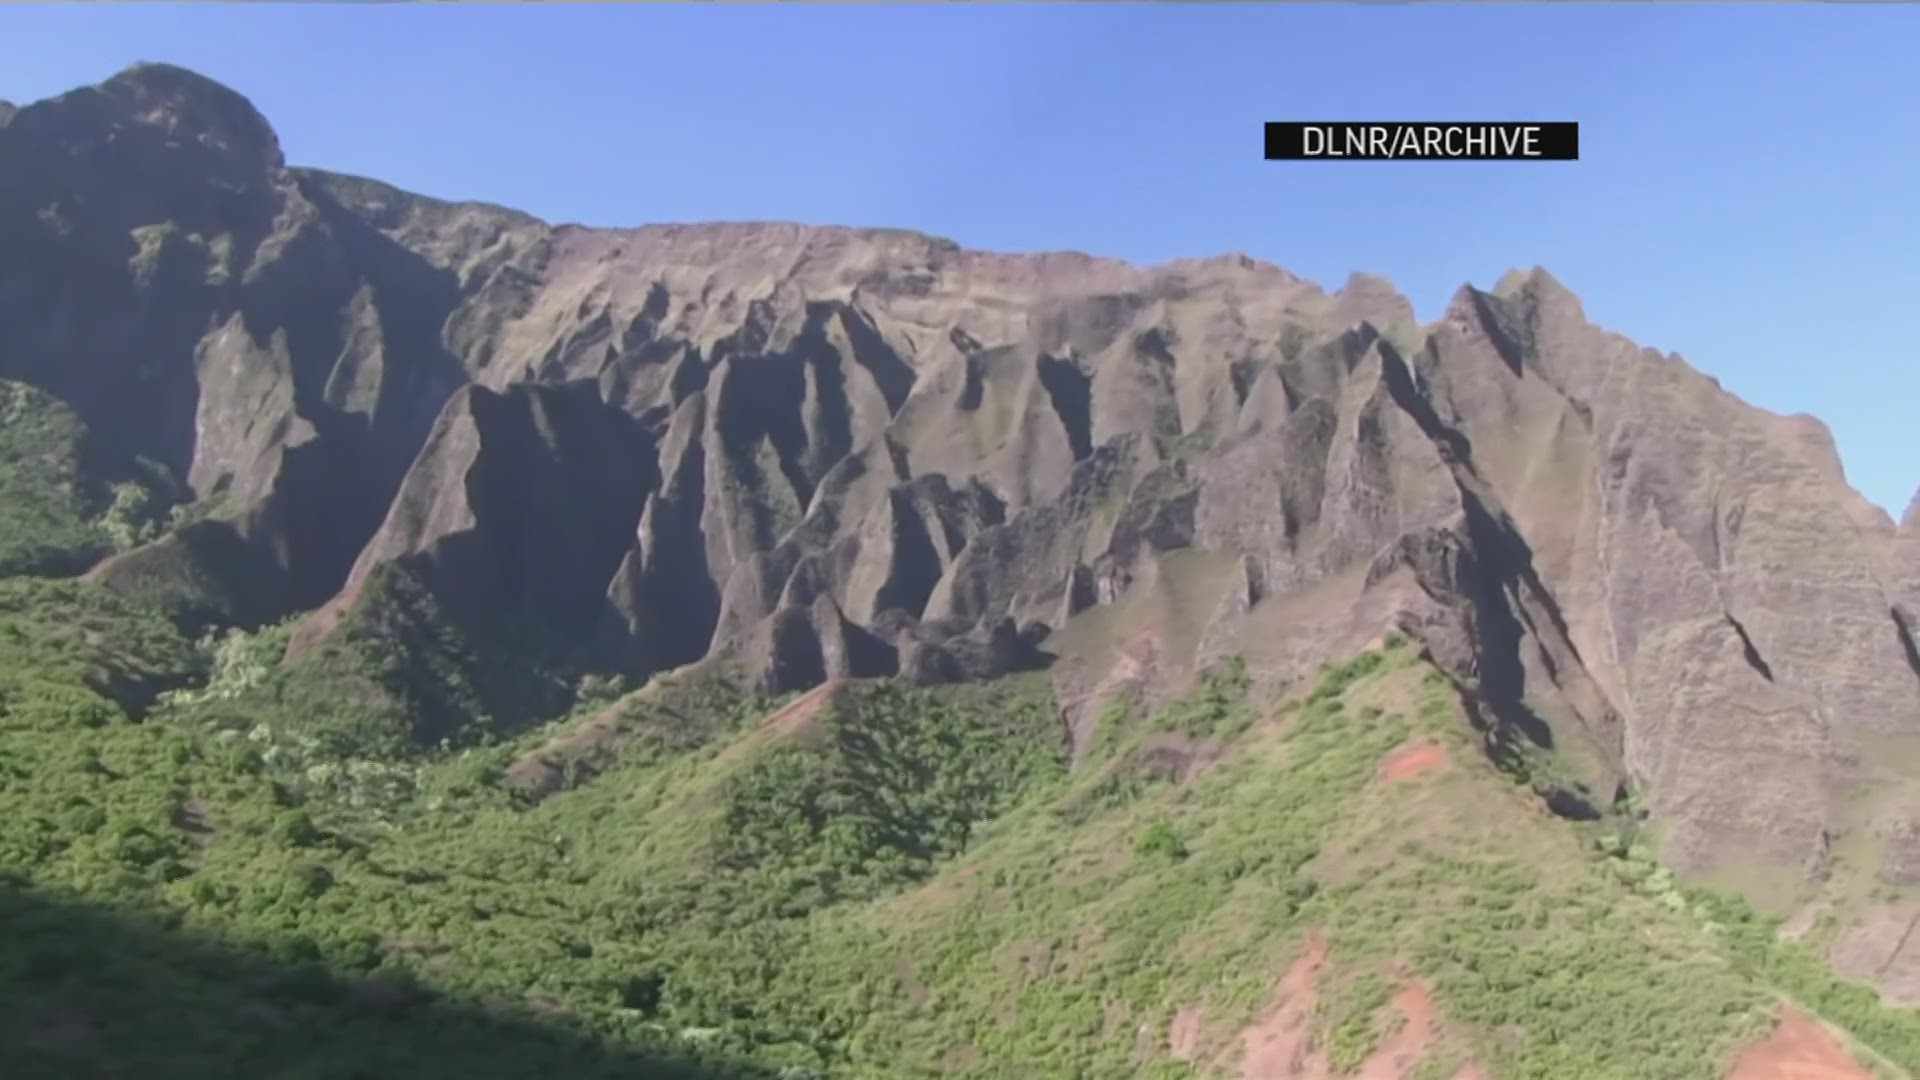 The search expanded on Friday for a helicopter carrying 7 people that went missing in Hawaii.